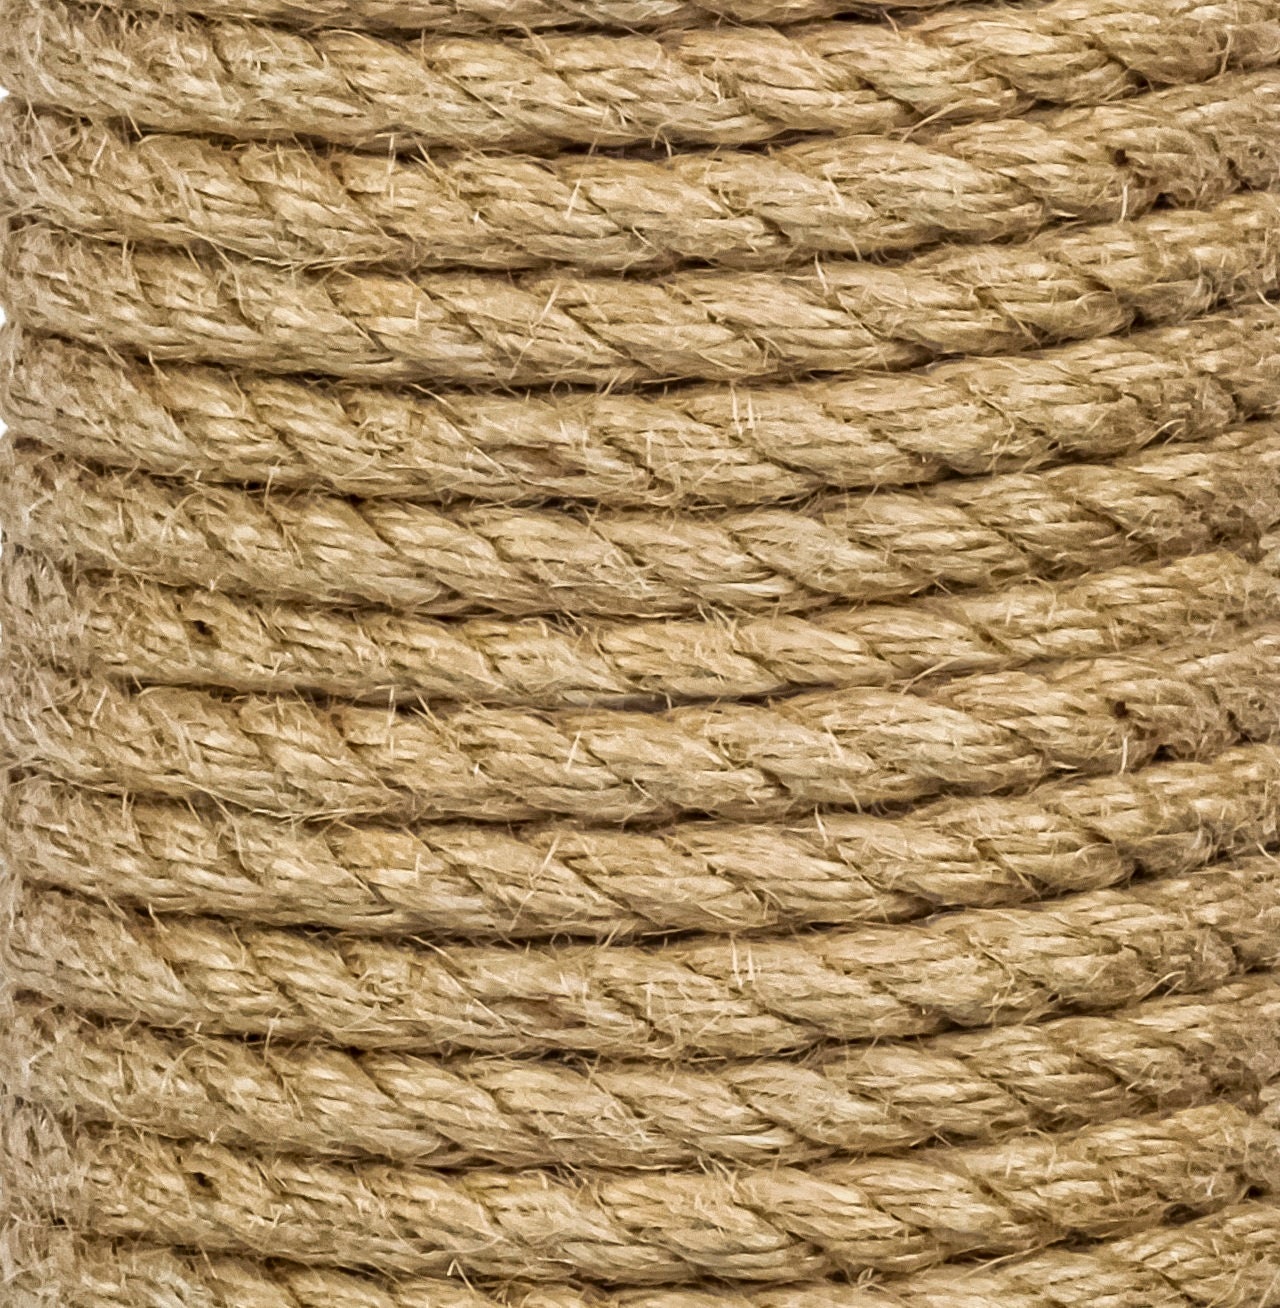 100 FT JUTE ROPE 6MM 1/4 Inch - Great for Macrame, Craft, Handmade